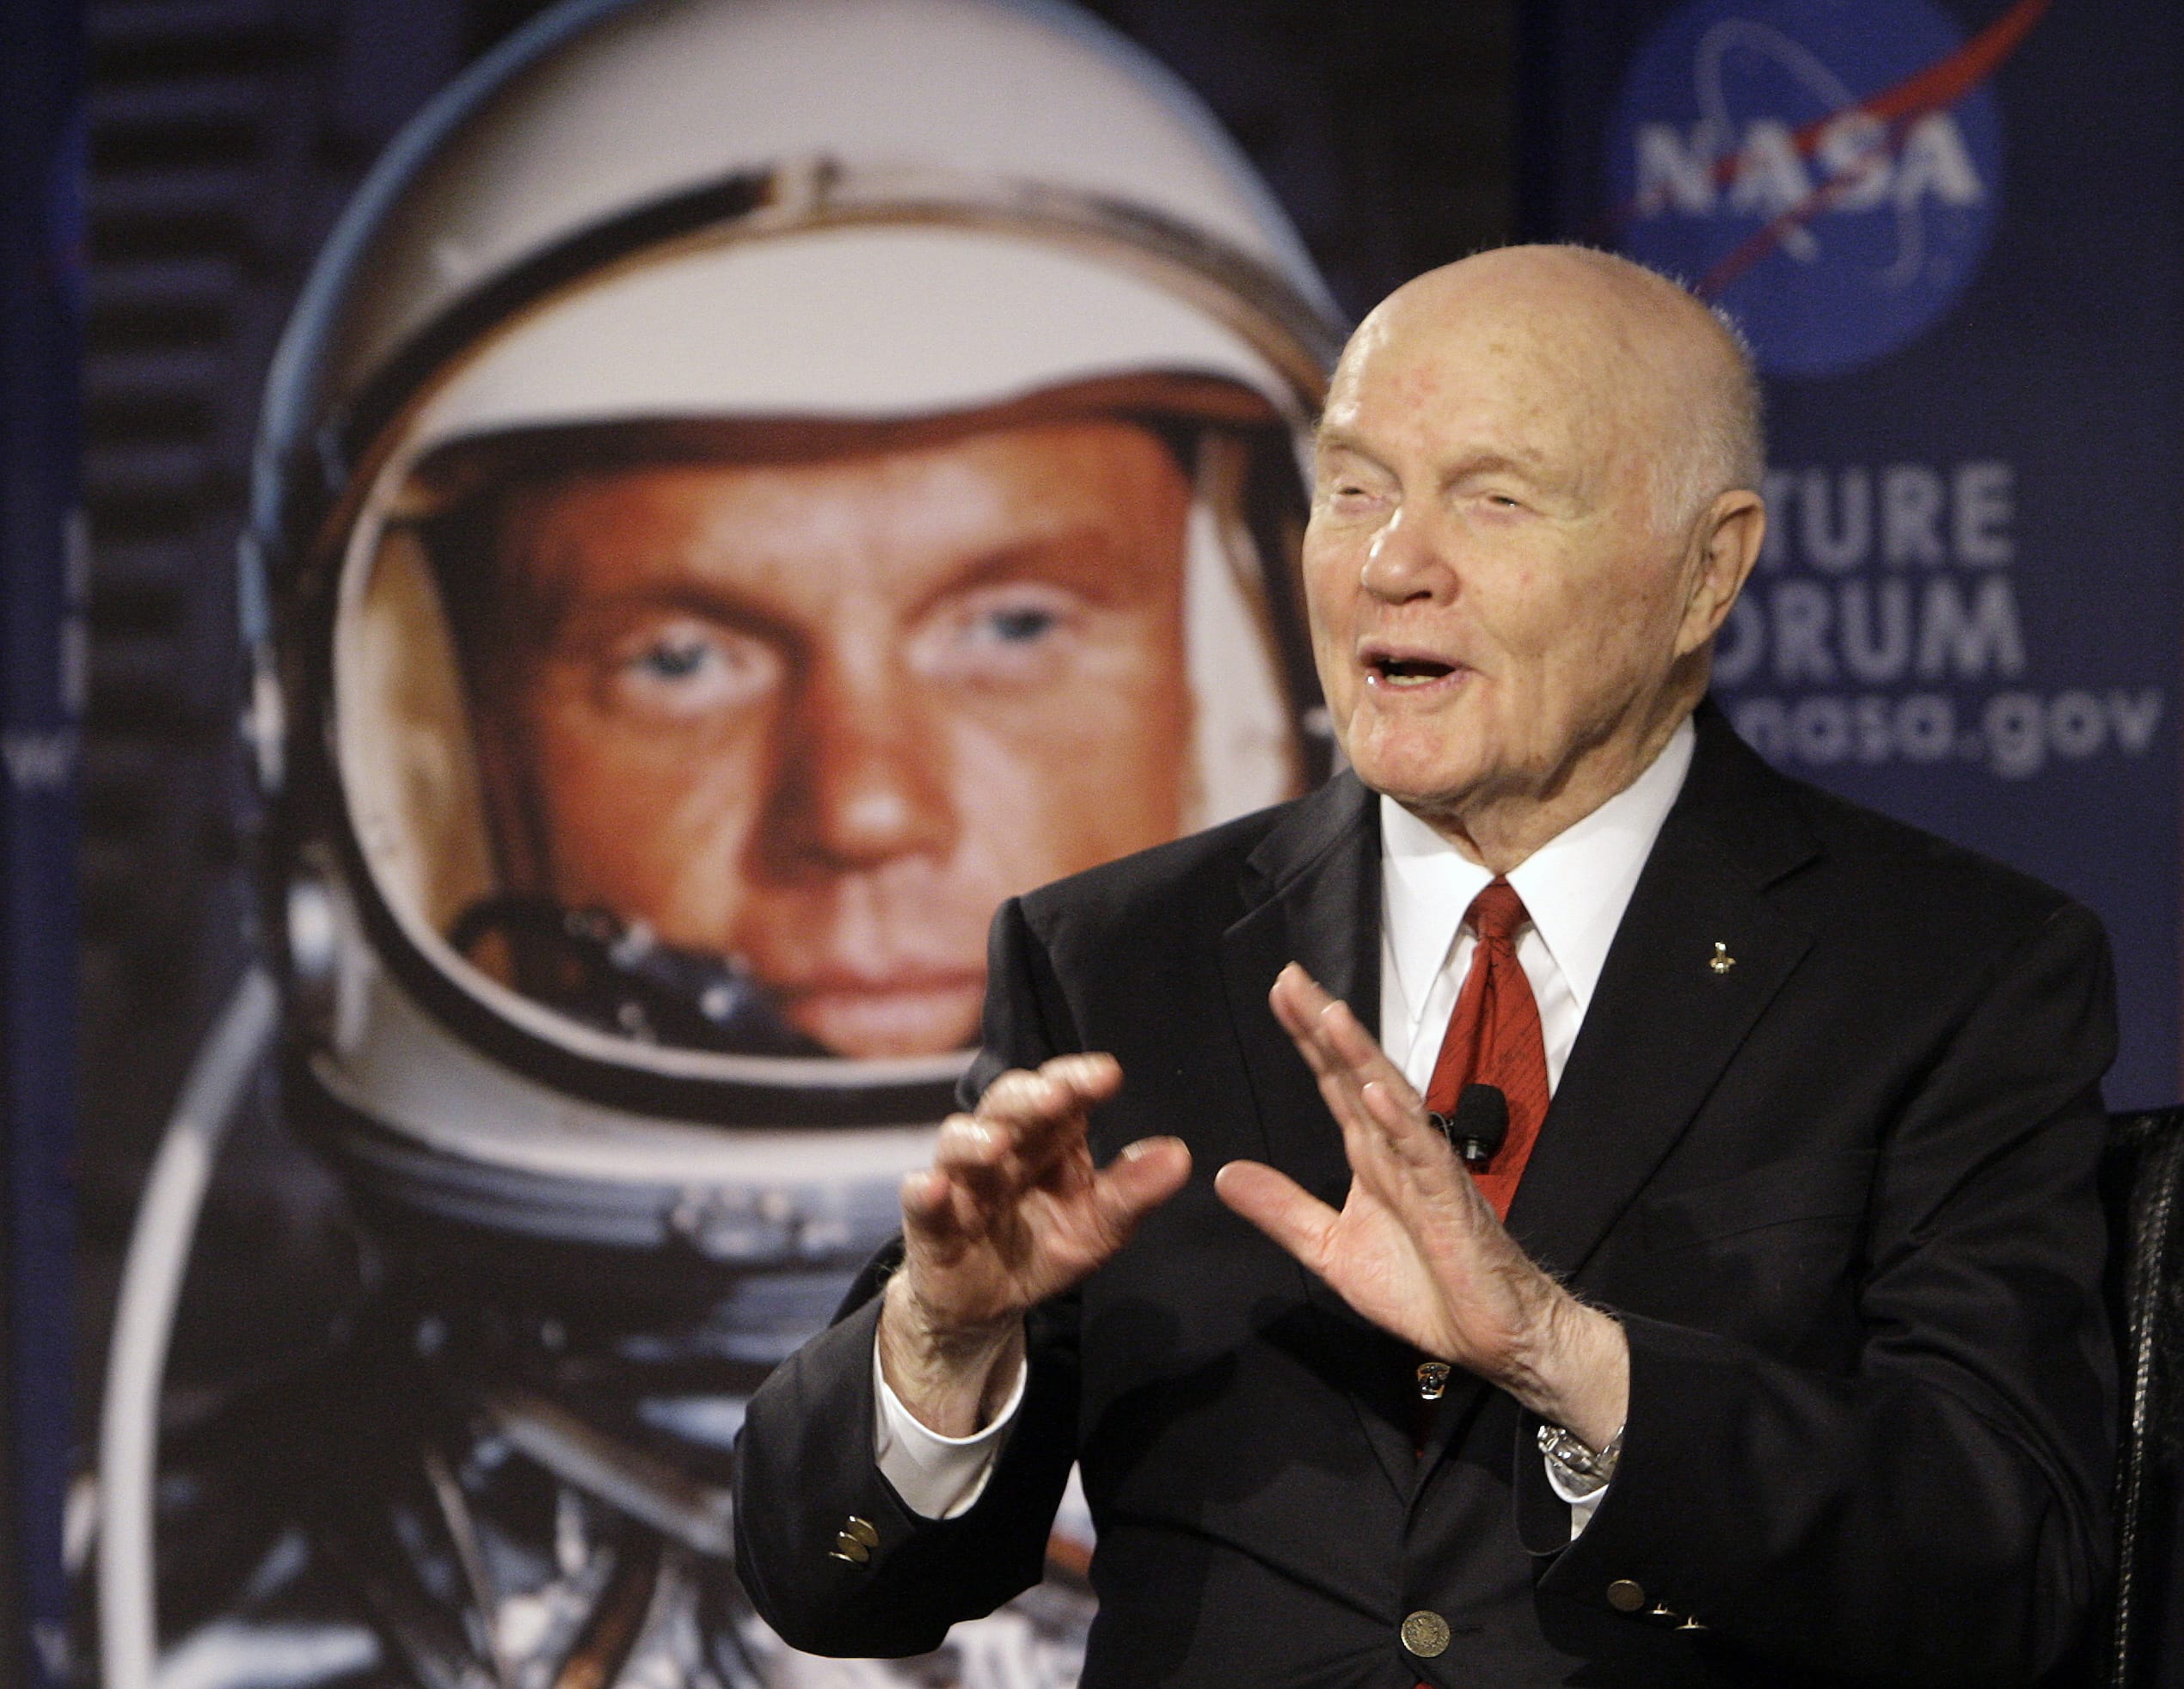 U.S. Sen. John Glenn talks with astronauts on the International Space Station via satellite Feb. 20, 2012 before a discussion titled "Learning from the Past to Innovate for the Future" in Columbus, Ohio. Glenn, who was the first U.S. astronaut to orbit Earth and later spent 24 years representing Ohio in the Senate, has died at 95.